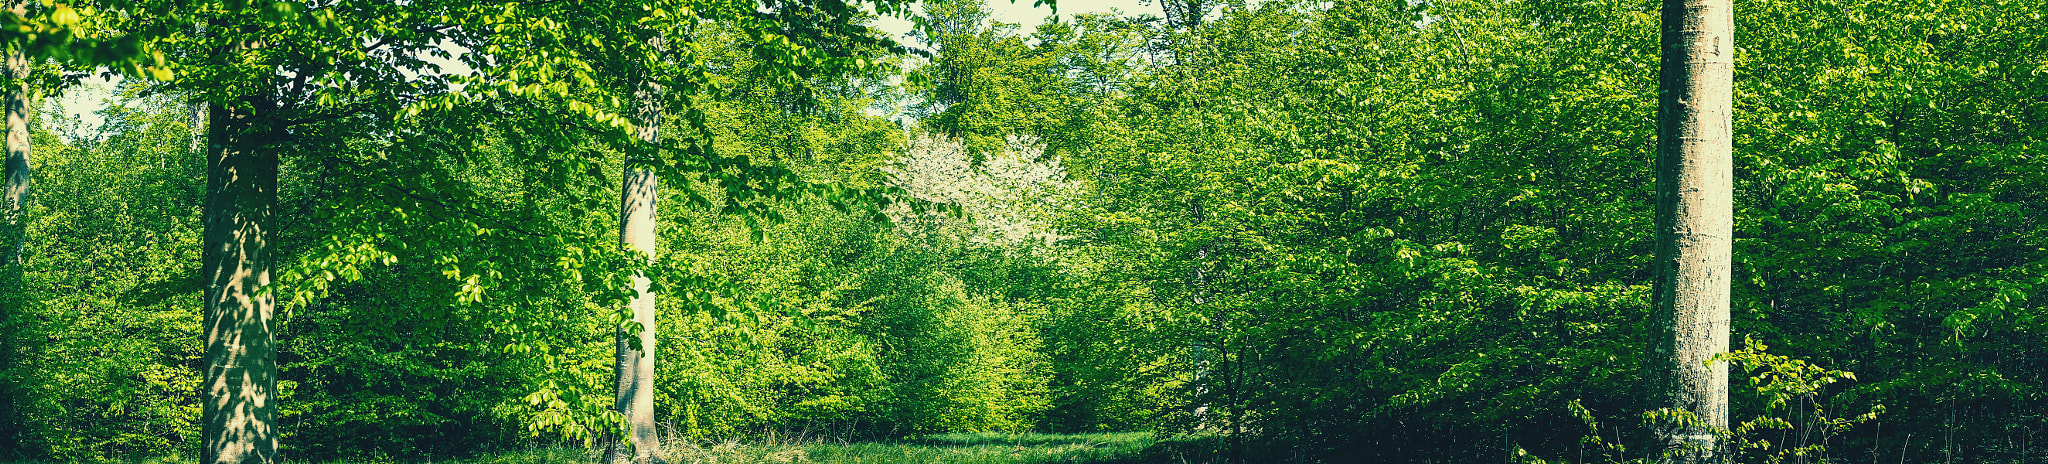 Sony a7R sample photo. Panorama forest scenery in green colors photography